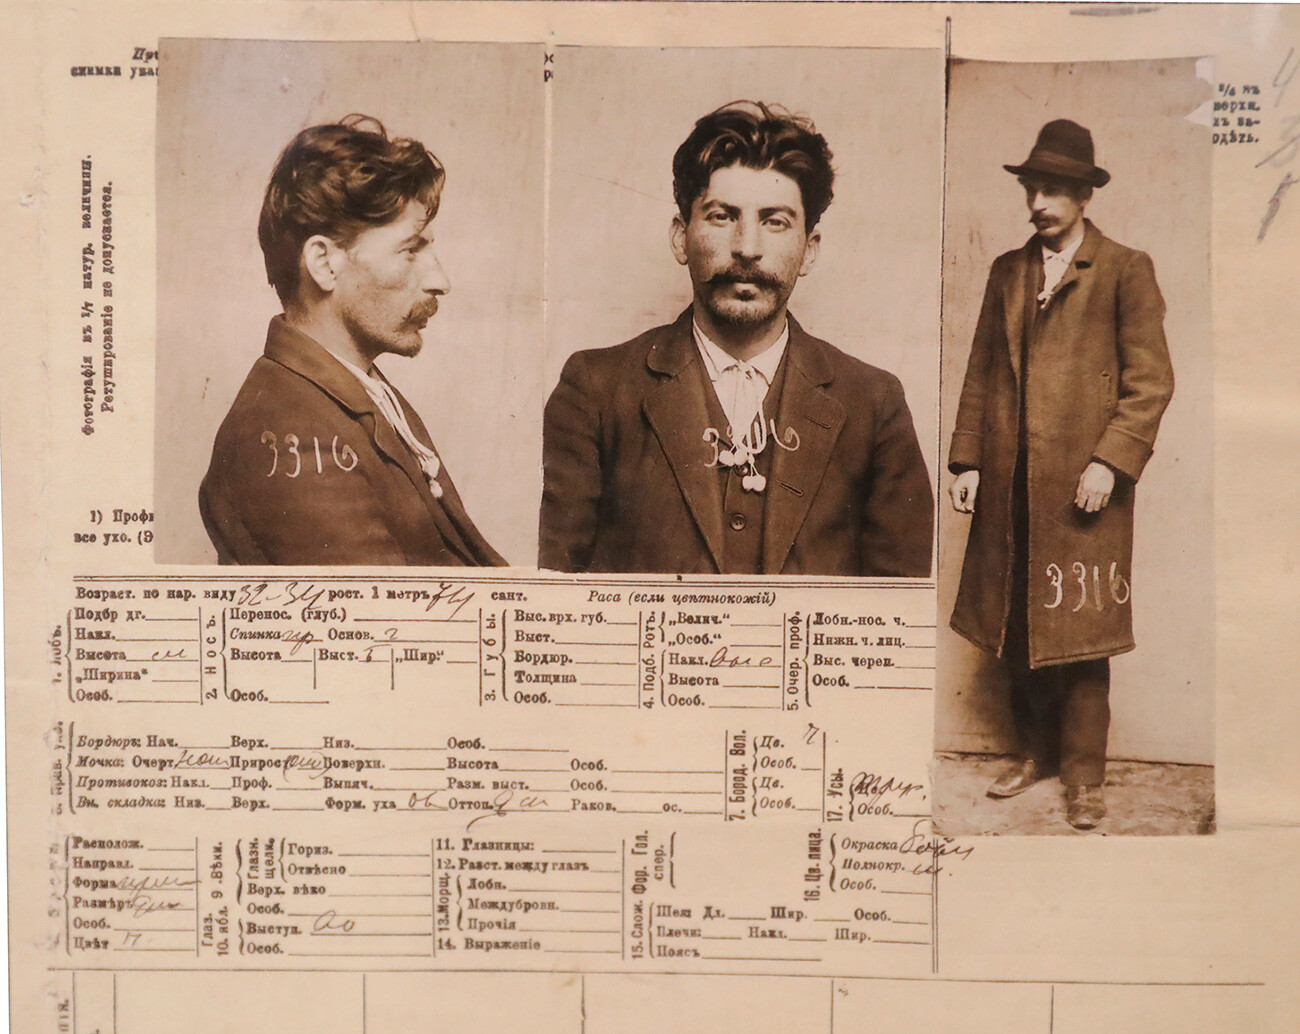 The information card on Joseph Stalin, from the files of the Tsarist secret police in St. Petersburg.